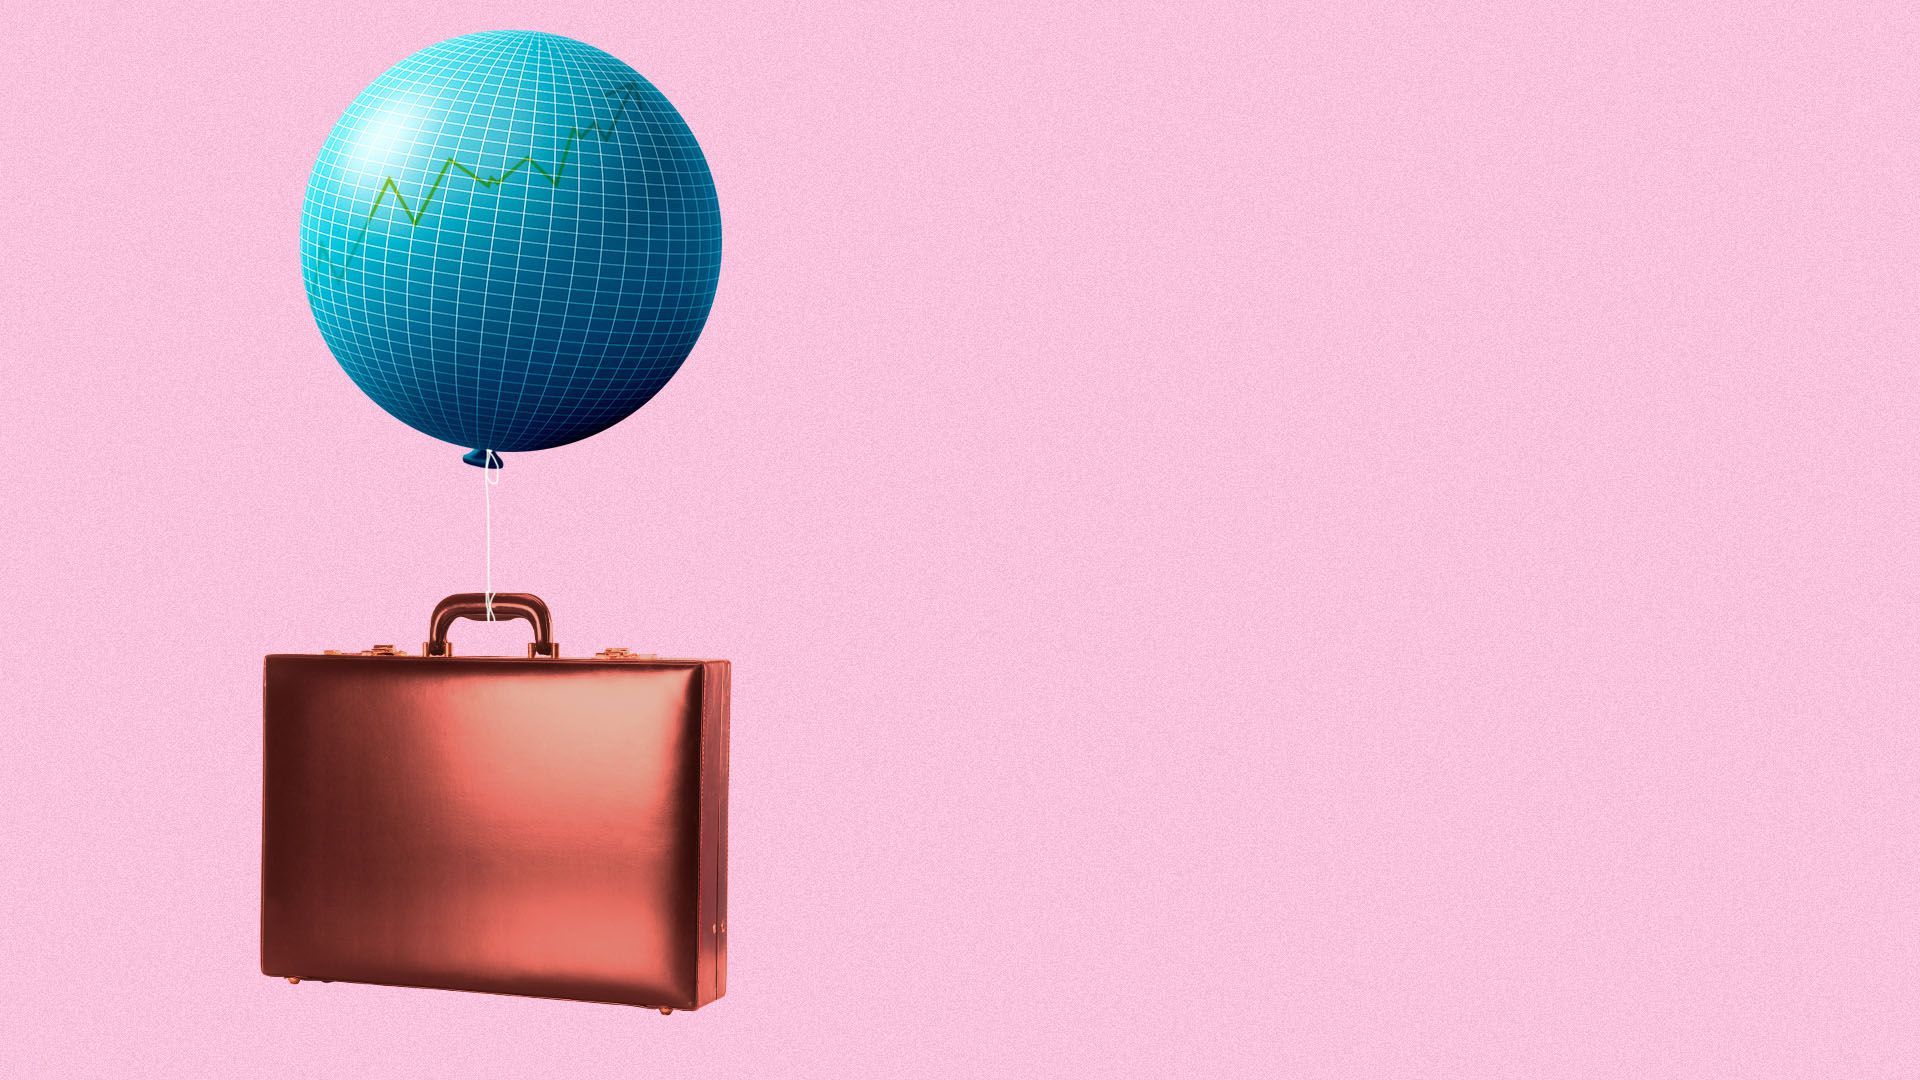 Illustration a briefcase tied to  a balloon with a stock market chart on it 